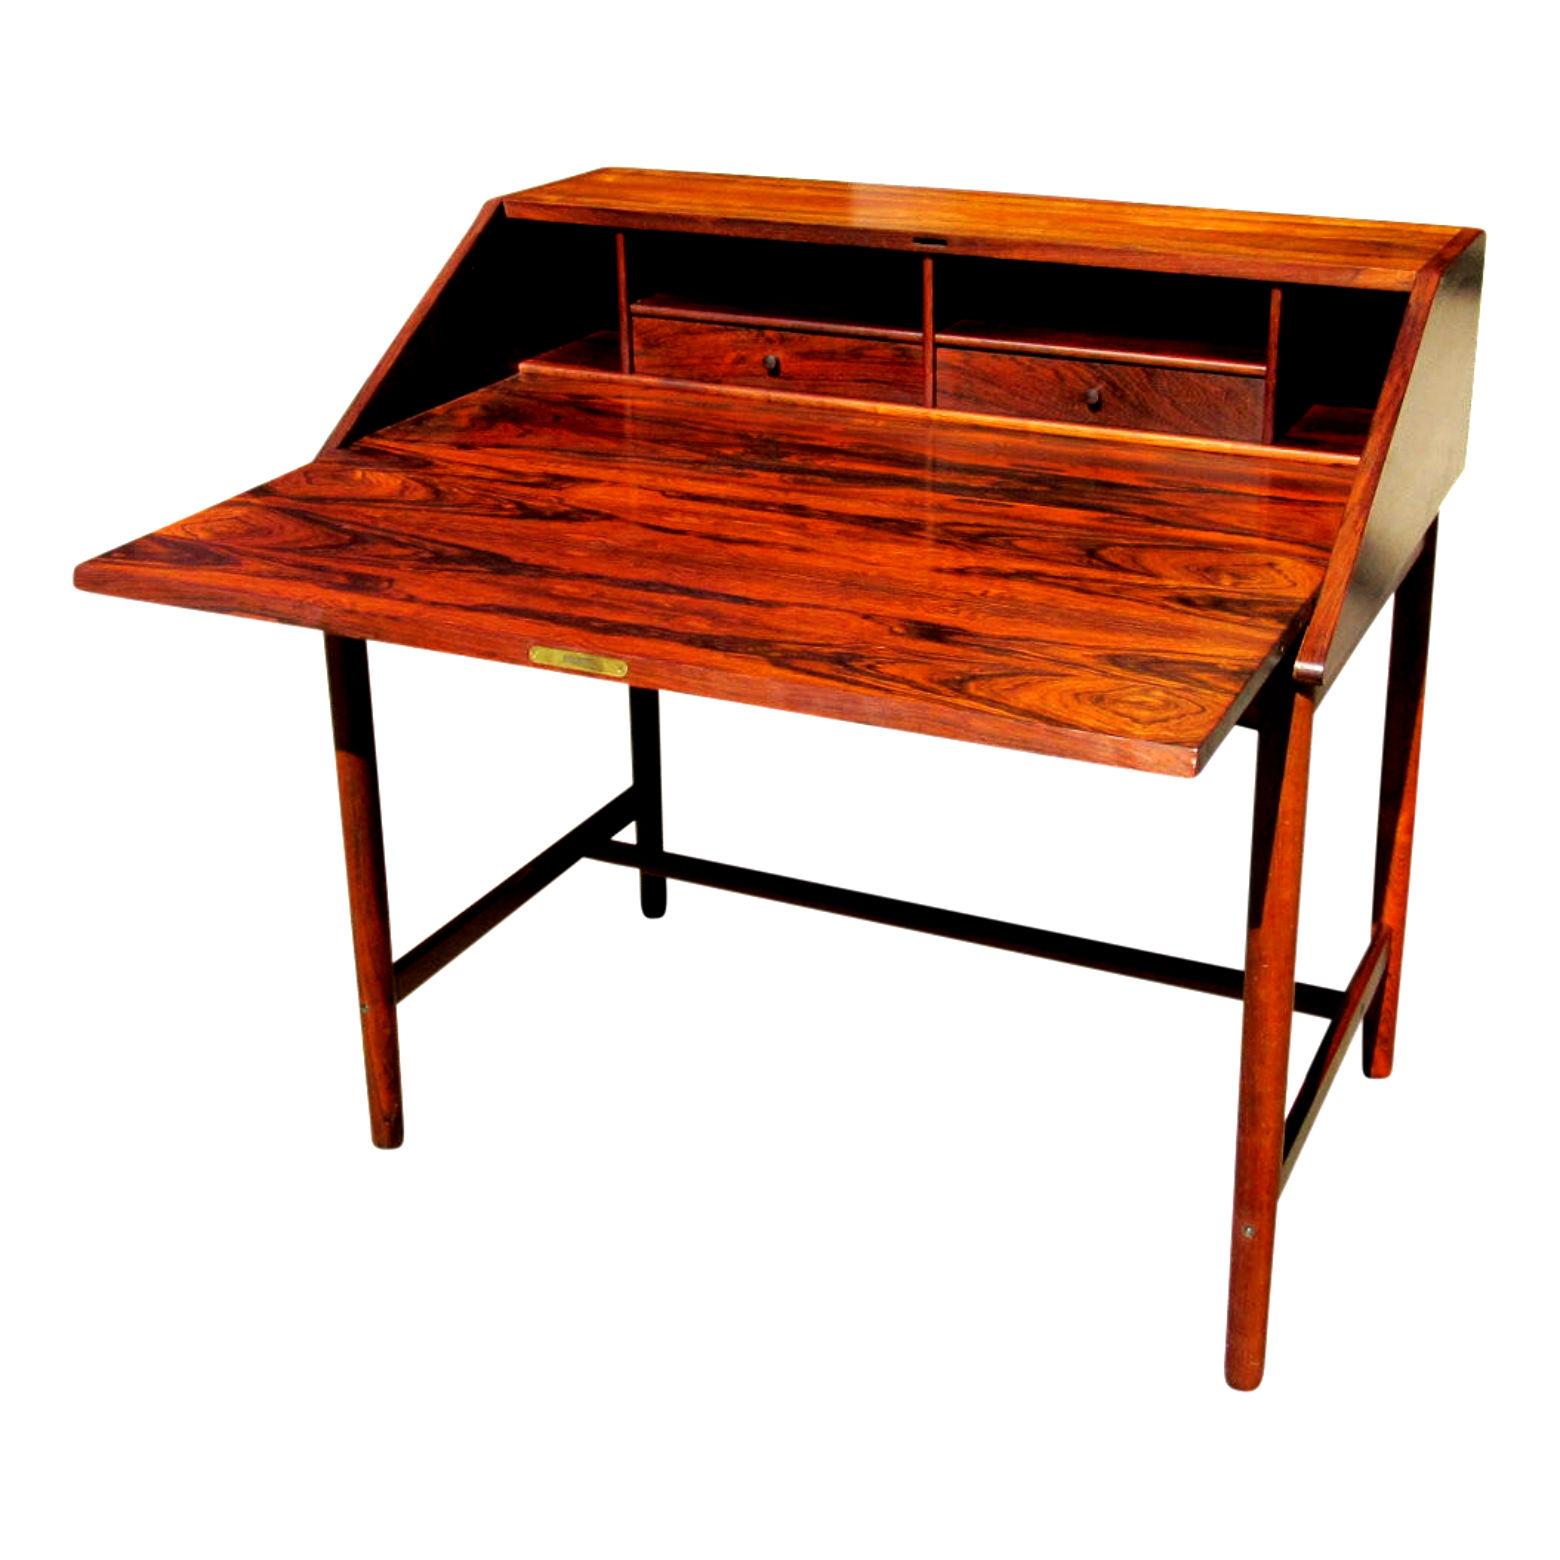 Mid-Century Modern Scandinavian writing desk in gorgeous Rio Rosewood, 1960s.  Often attributed to Drylund Denmark but Unmarked. Fold down top opens to reveal two drawers and four open storage areas.  Exceptional original condition. 